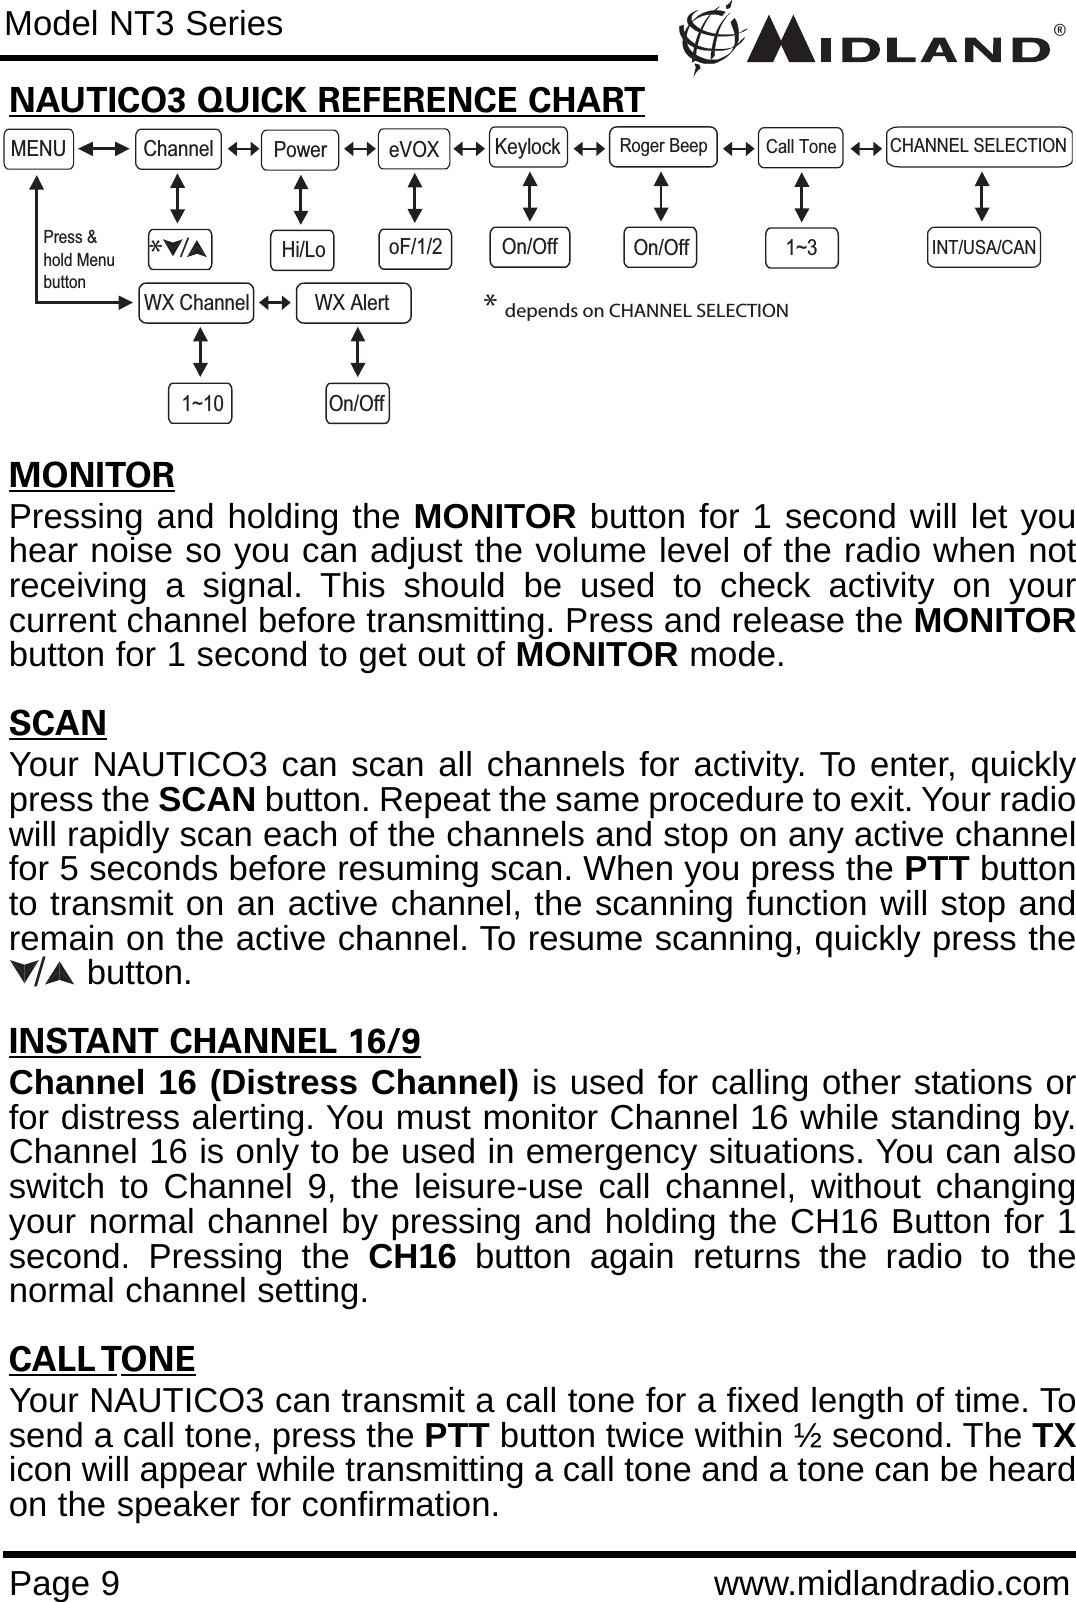 ®Page 9 www.midlandradio.comNAUTICO3 QUICK REFERENCE CHARTMONITORPressing and holding the MONITOR button for 1 second will let youhear noise so you can adjust the volume level of the radio when notreceiving a signal. This should be used to check activity on yourcurrent channel before transmitting. Press and release the MONITORbutton for 1 second to get out of MONITOR mode.SCANYour NAUTICO3 can scan all channels for activity. To enter, quicklypress the SCAN button. Repeat the same procedure to exit. Your radiowill rapidly scan each of the channels and stop on any active channelfor 5 seconds before resuming scan. When you press the PTT buttonto transmit on an active channel, the scanning function will stop andremain on the active channel. To resume scanning, quickly press thebutton.INSTANT CHANNEL 16/9Channel 16 (Distress Channel) is used for calling other stations orfor distress alerting. You must monitor Channel 16 while standing by.Channel 16 is only to be used in emergency situations. You can alsoswitch to Channel 9, the leisure-use call channel, without changingyour normal channel by pressing and holding the CH16 Button for 1second. Pressing the CH16 button again returns the radio to thenormal channel setting.CALL TONEYour NAUTICO3 can transmit a call tone for a fixed length of time. Tosend a call tone, press the PTT button twice within ½ second. The TXicon will appear while transmitting a call tone and a tone can be heardon the speaker for confirmation.Model NT3 SeriesMENU Channel KeylockOn/OffPowerHi/LoRoger BeepOn/OffeVOXoF/1/2Call Tone1~3WX Channel1~10Press &amp;hold MenubuttonCHANNEL SELECTIONINT/USA/CANWX AlertOn/Off/** depends on CHANNEL SELECTION /